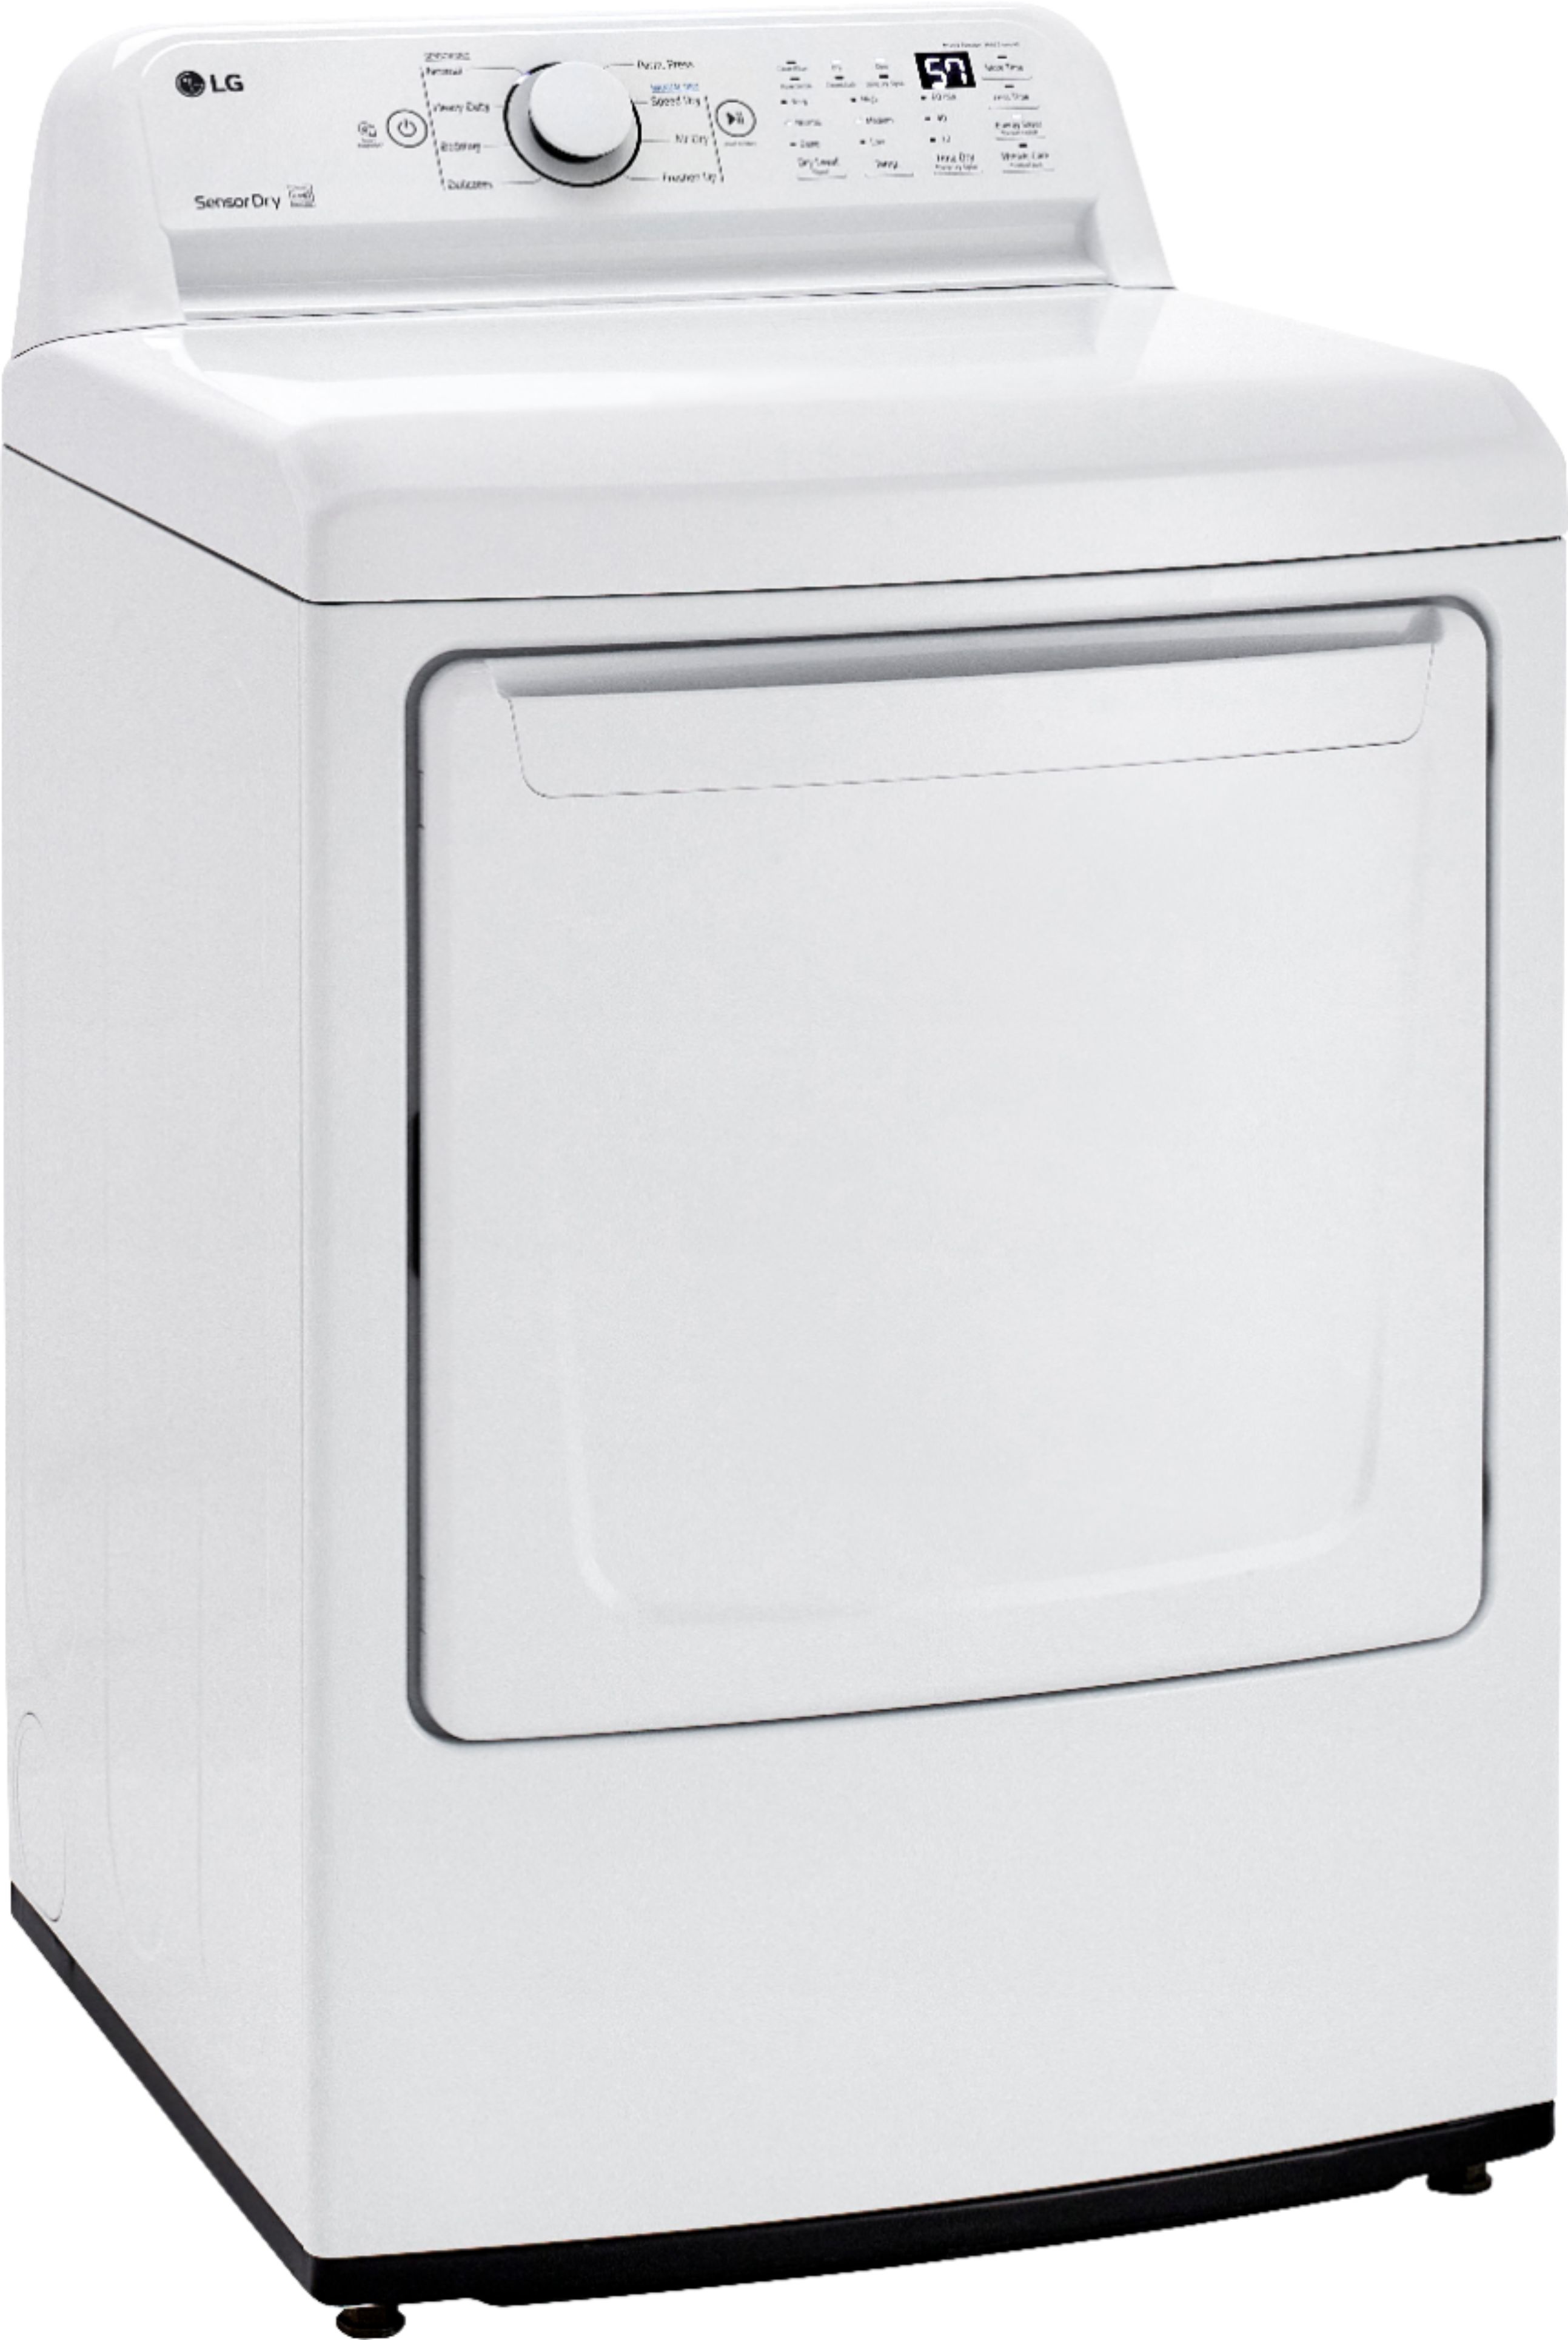 Angle View: Whirlpool - 7.0 Cu. Ft. Electric Dryer with Steam and Moisture Sensing - White